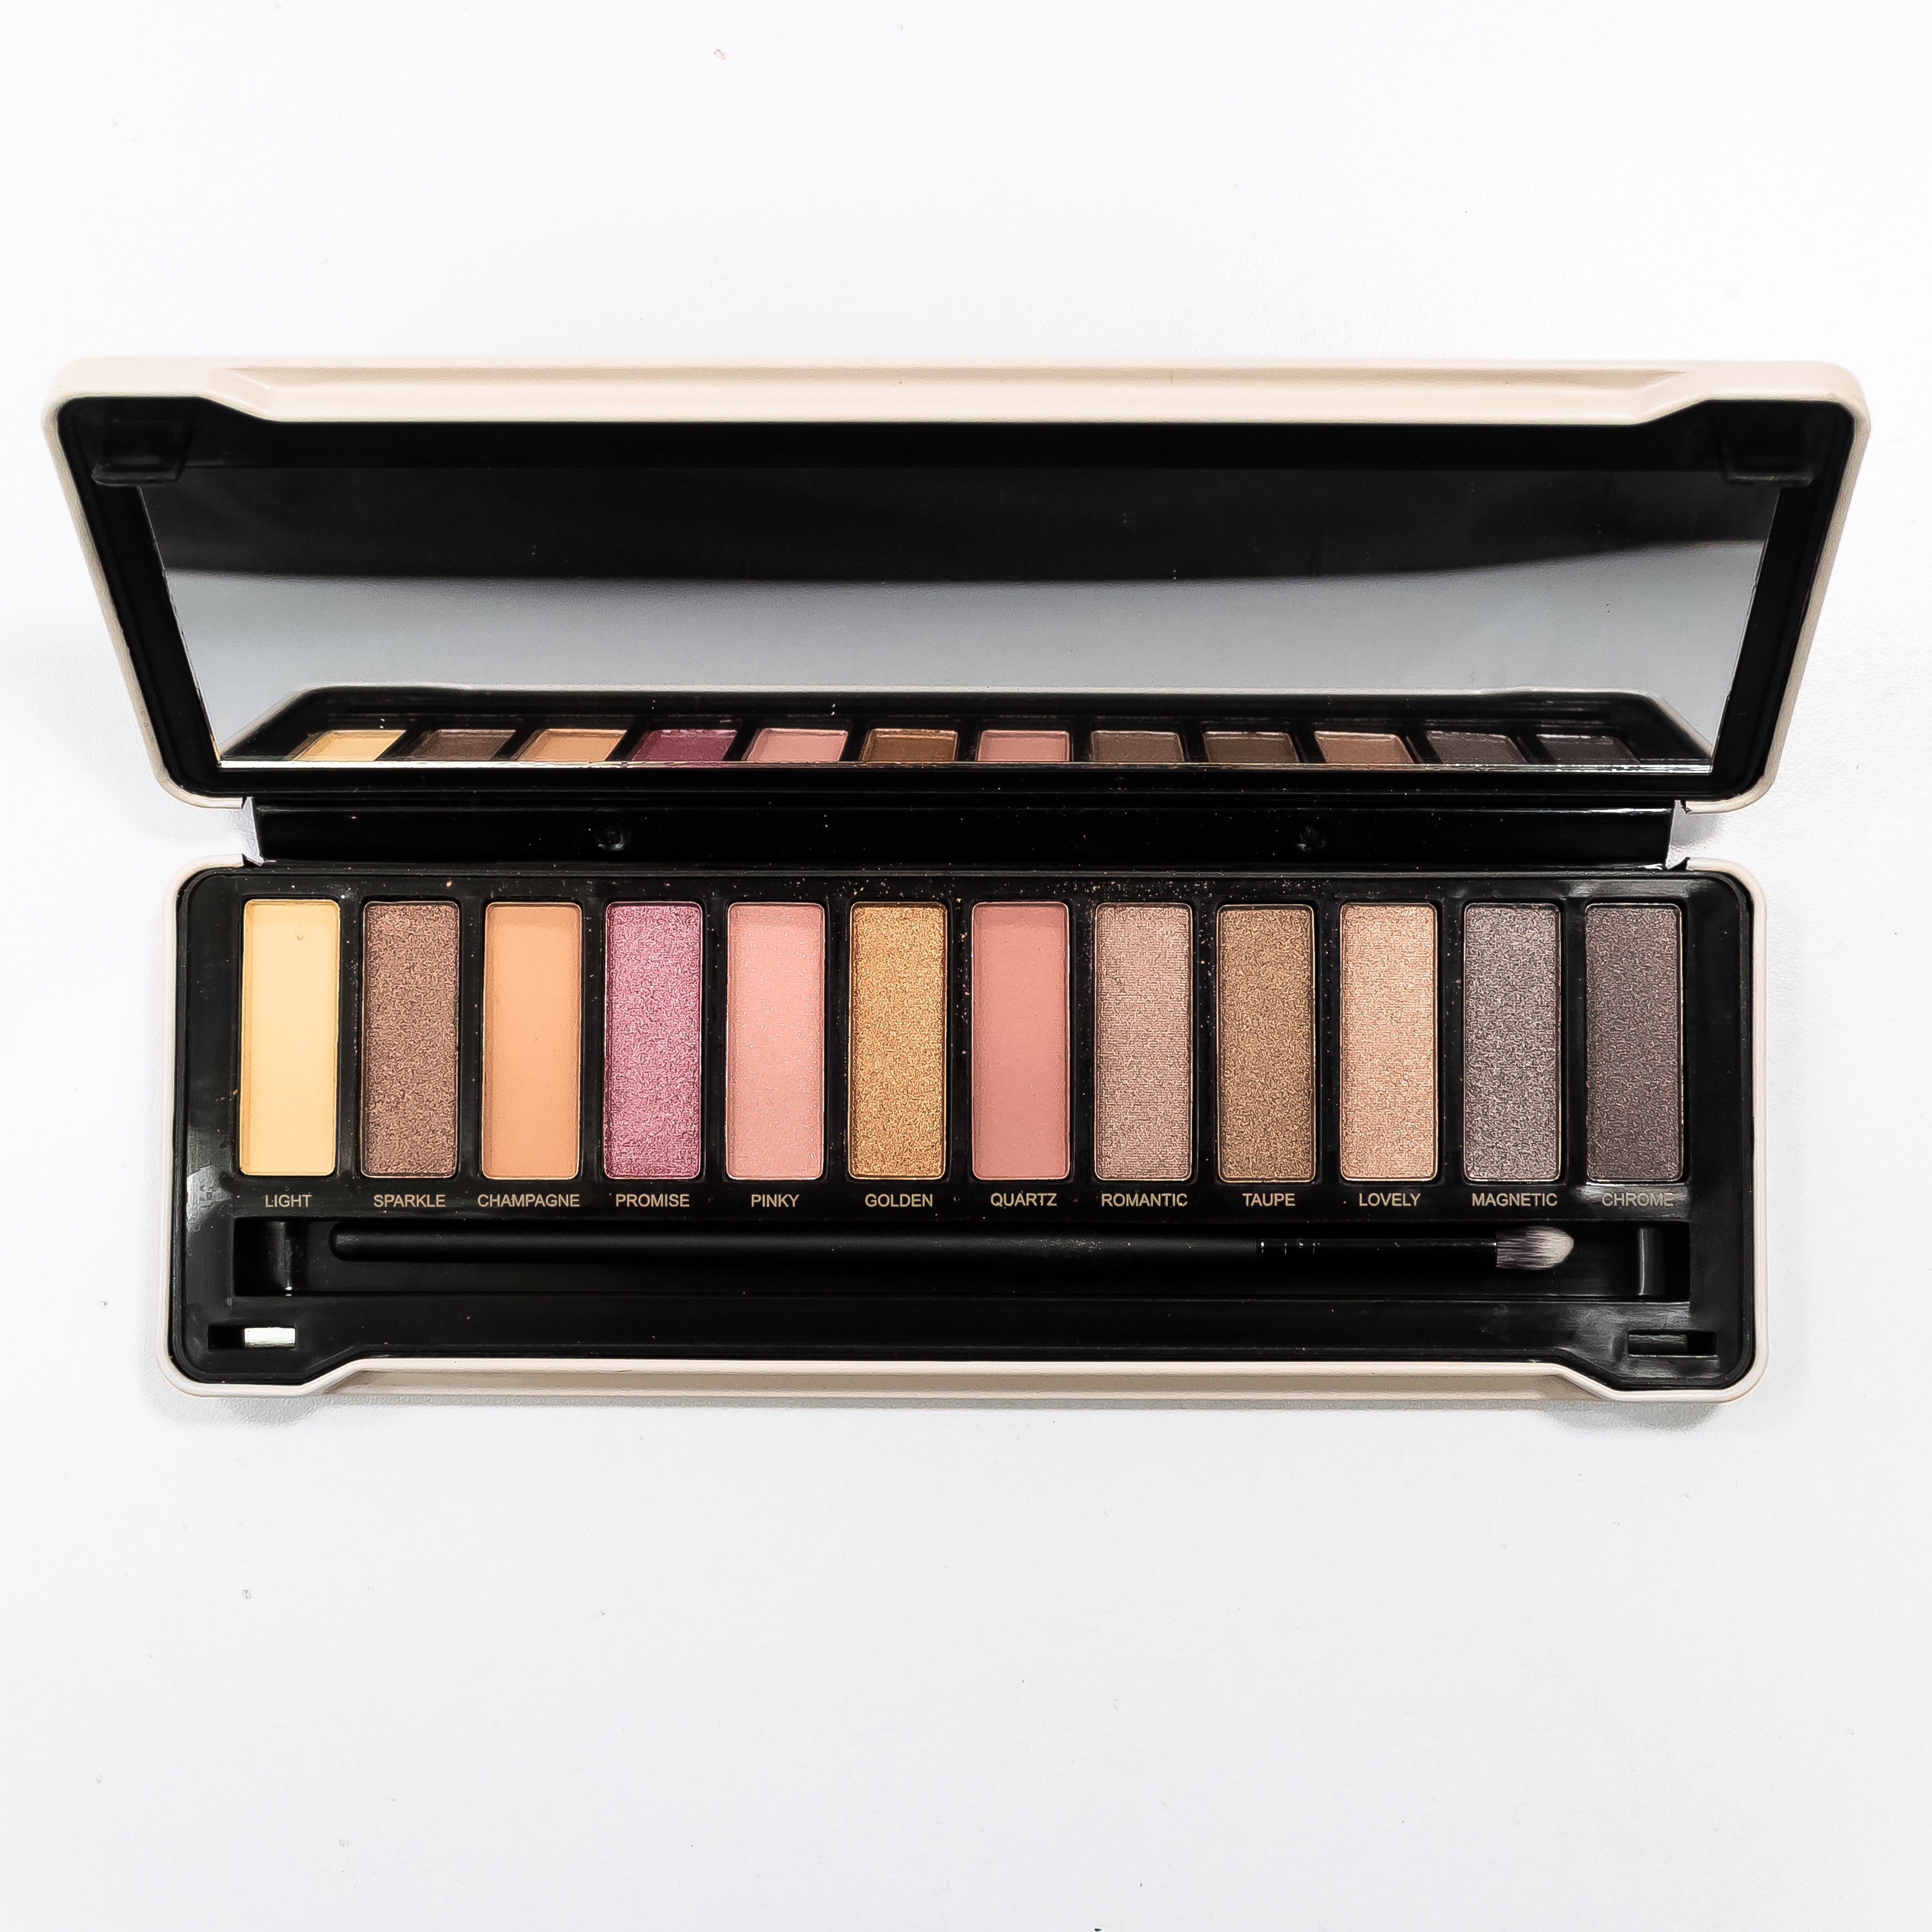 EYESHADOW PALETTE NUDES ESSENTIAL COLLECTION 12